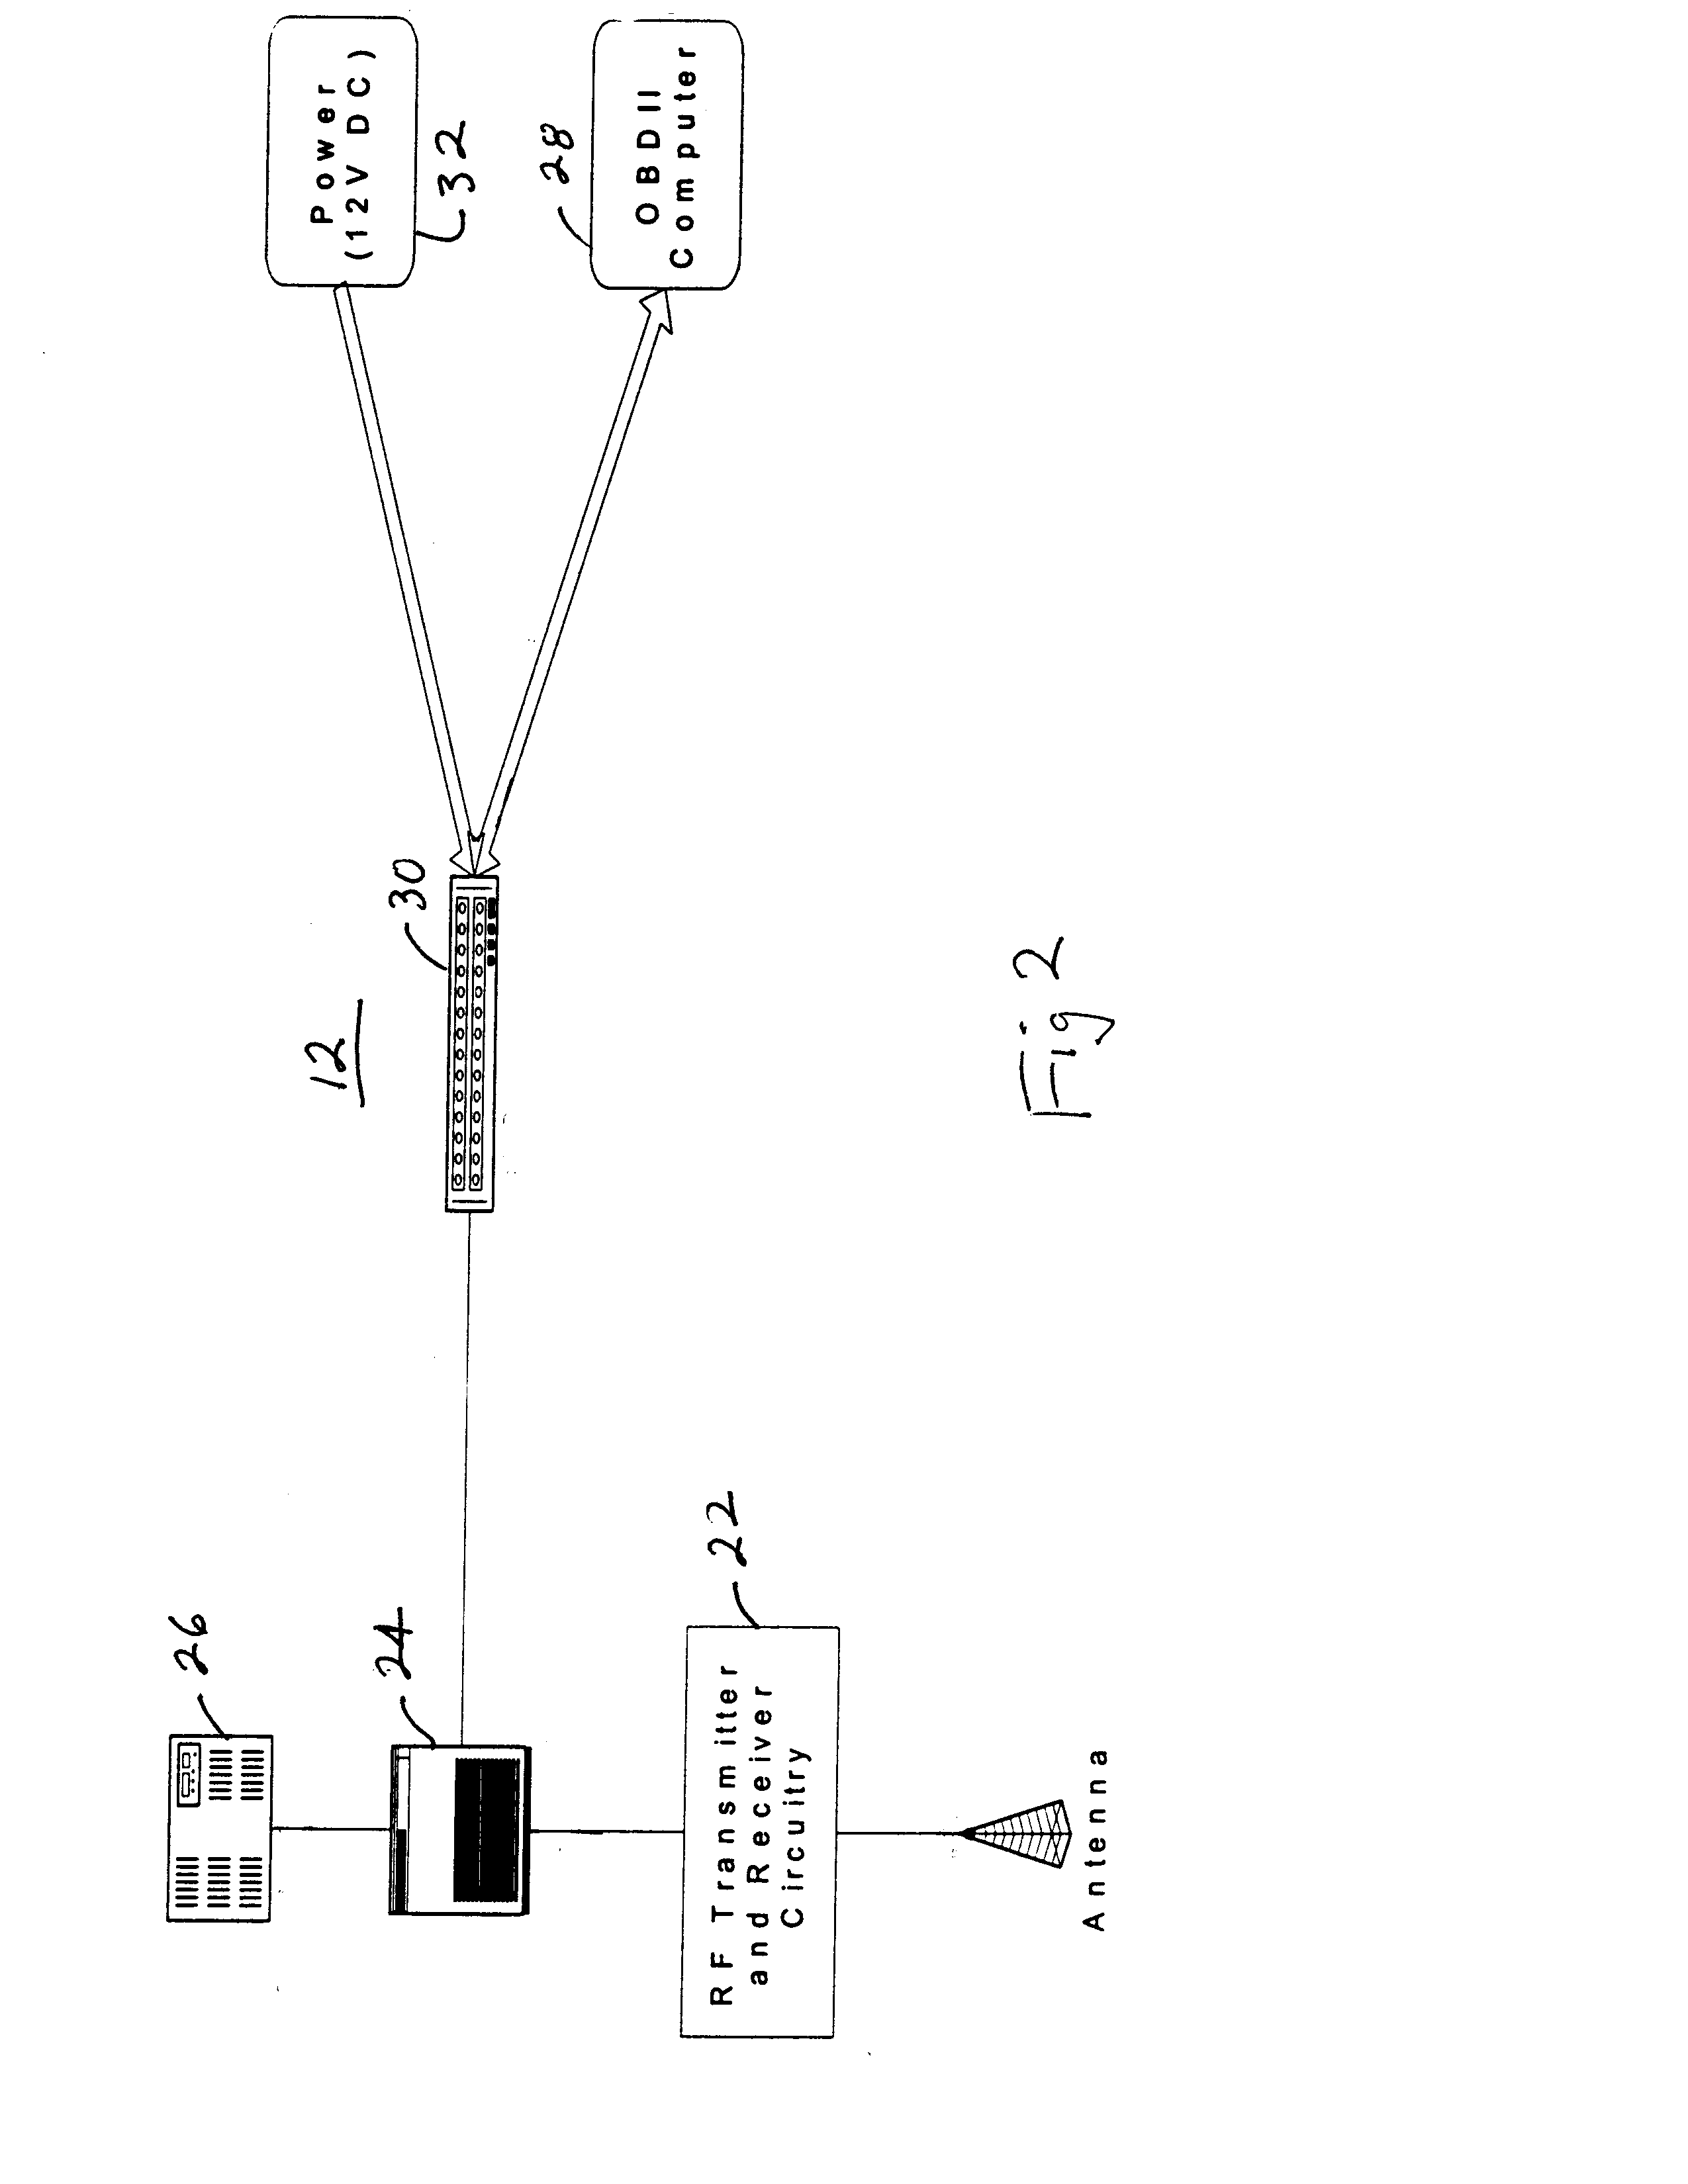 Vehicle inspection enforcement system and method offering multiple data transmissions on the road